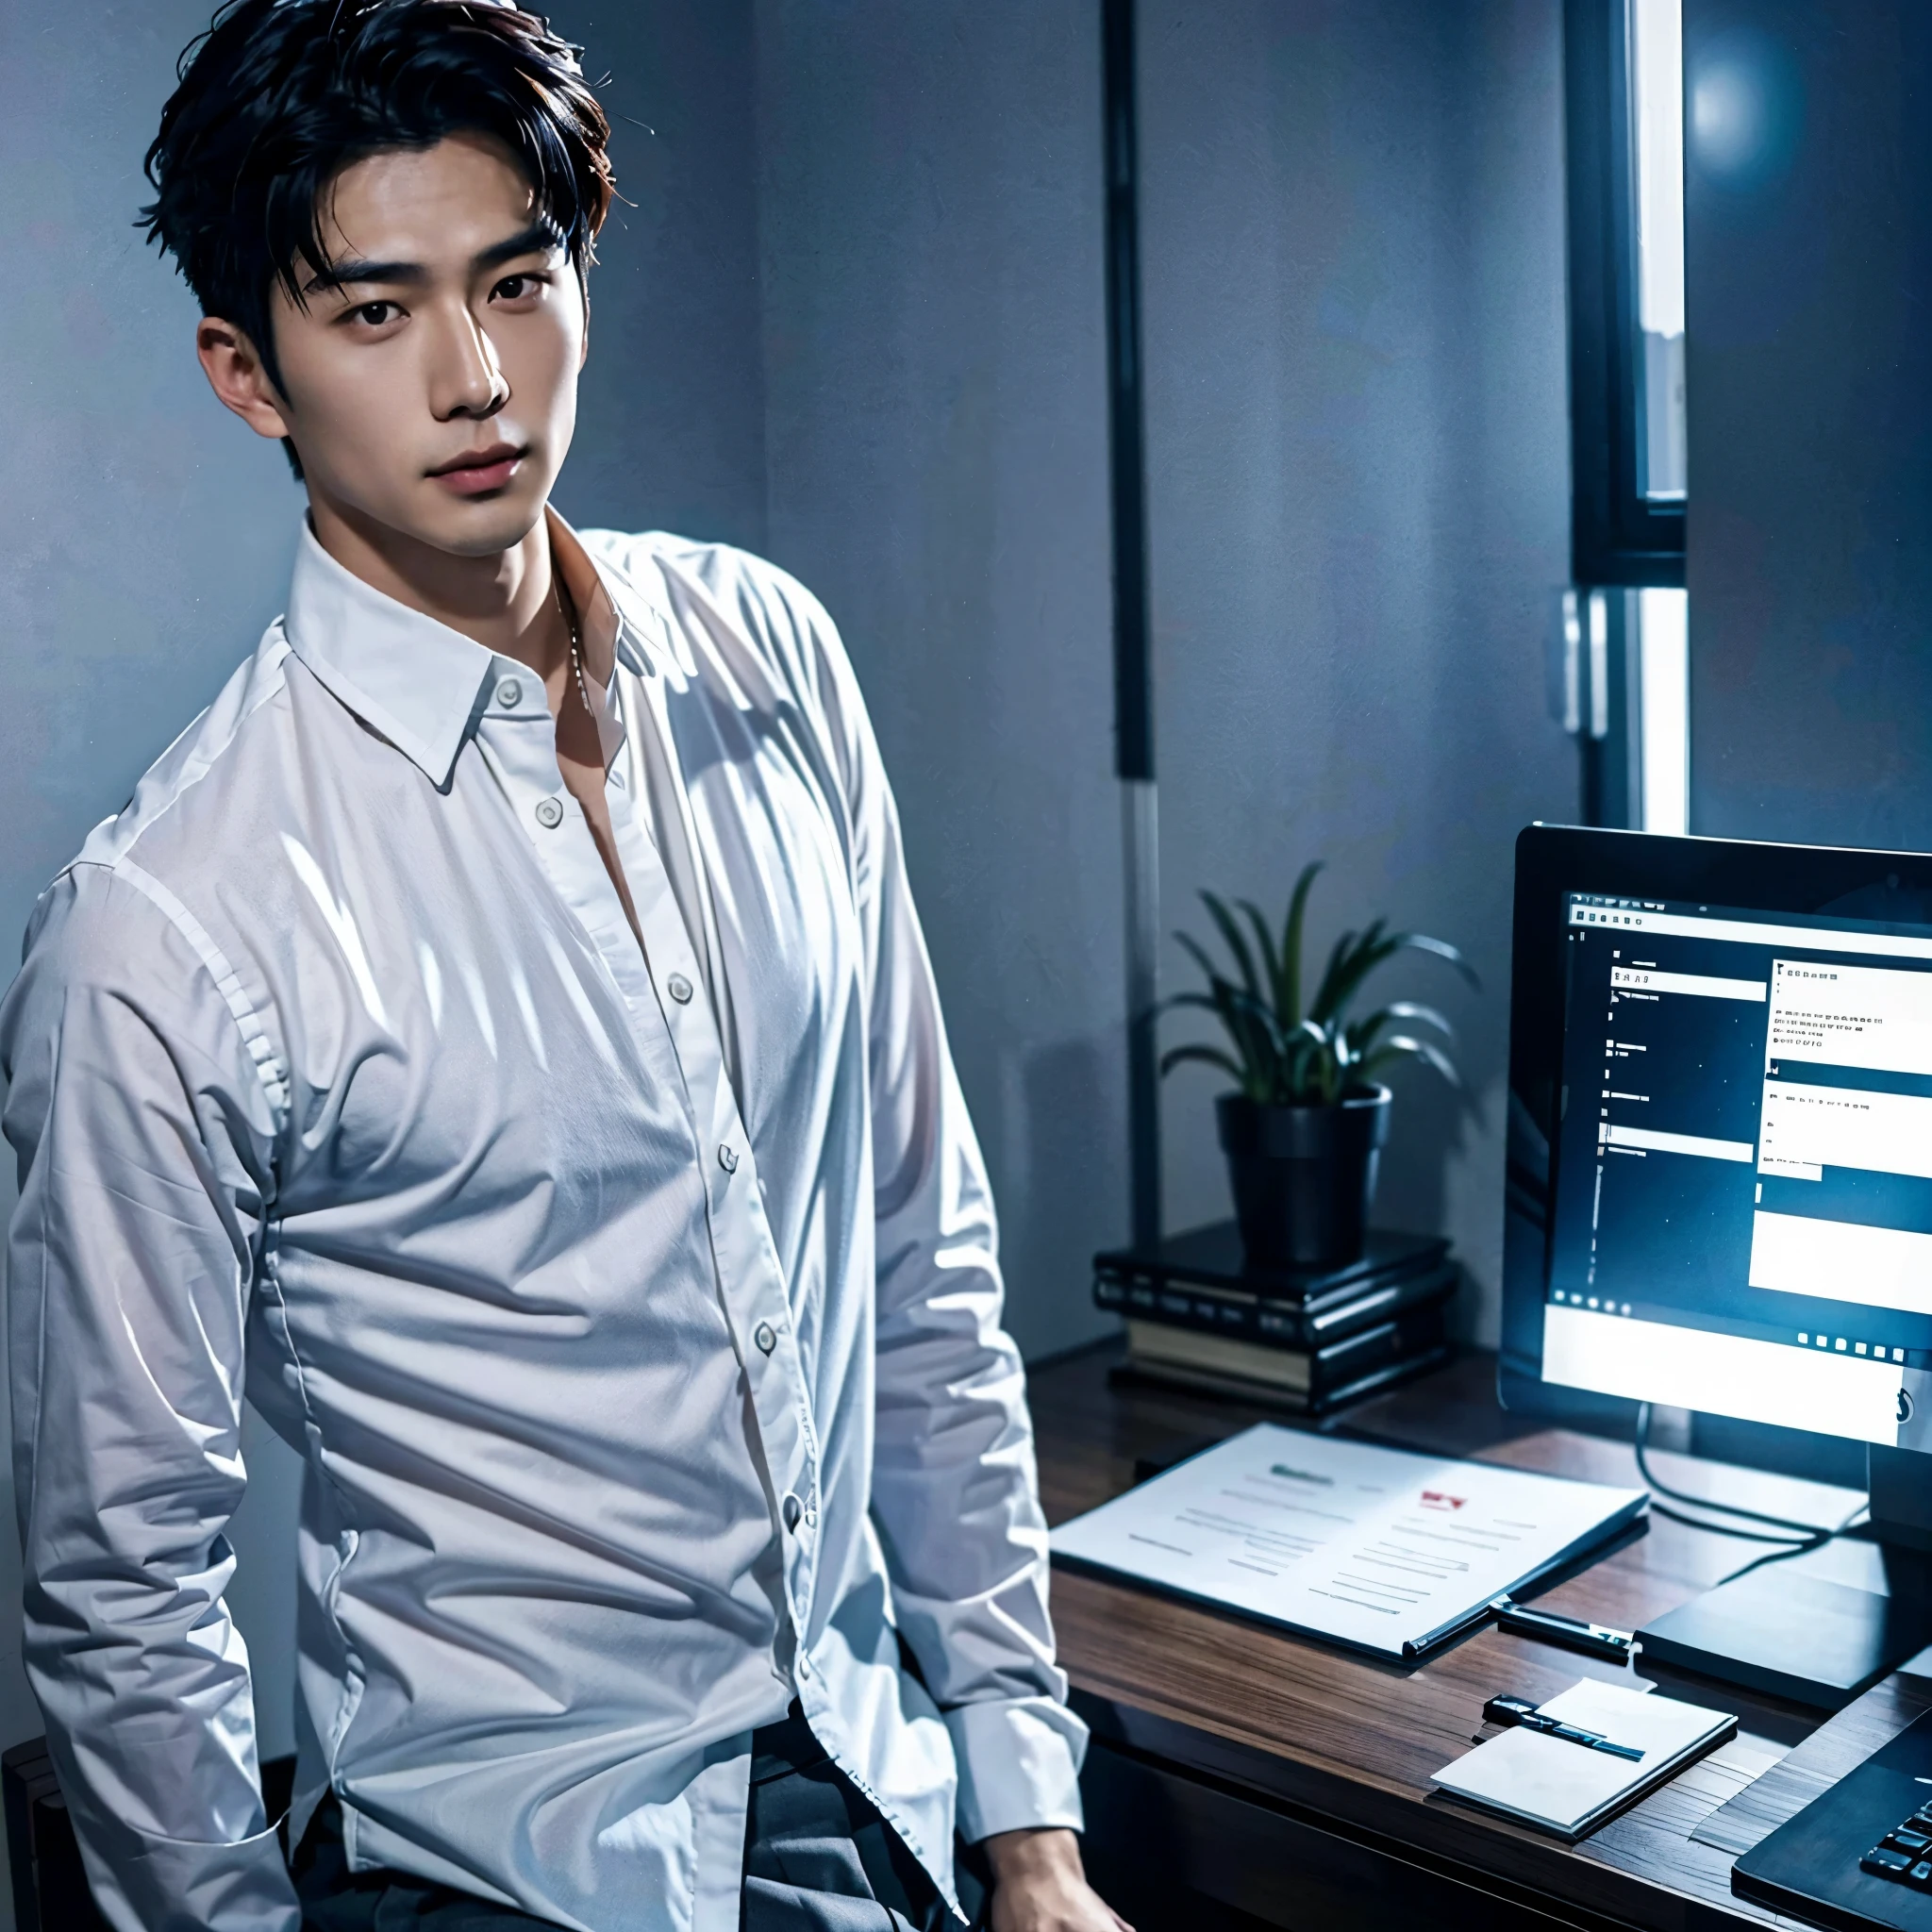 best quality, Realistic picture, Asian men are very handsome., Age 25, Read the document, There is a work desk., Lots of documents, not organized, office atmosphere modern style, Wear a white collared shirt with 2 buttons undone., see chest muscles 